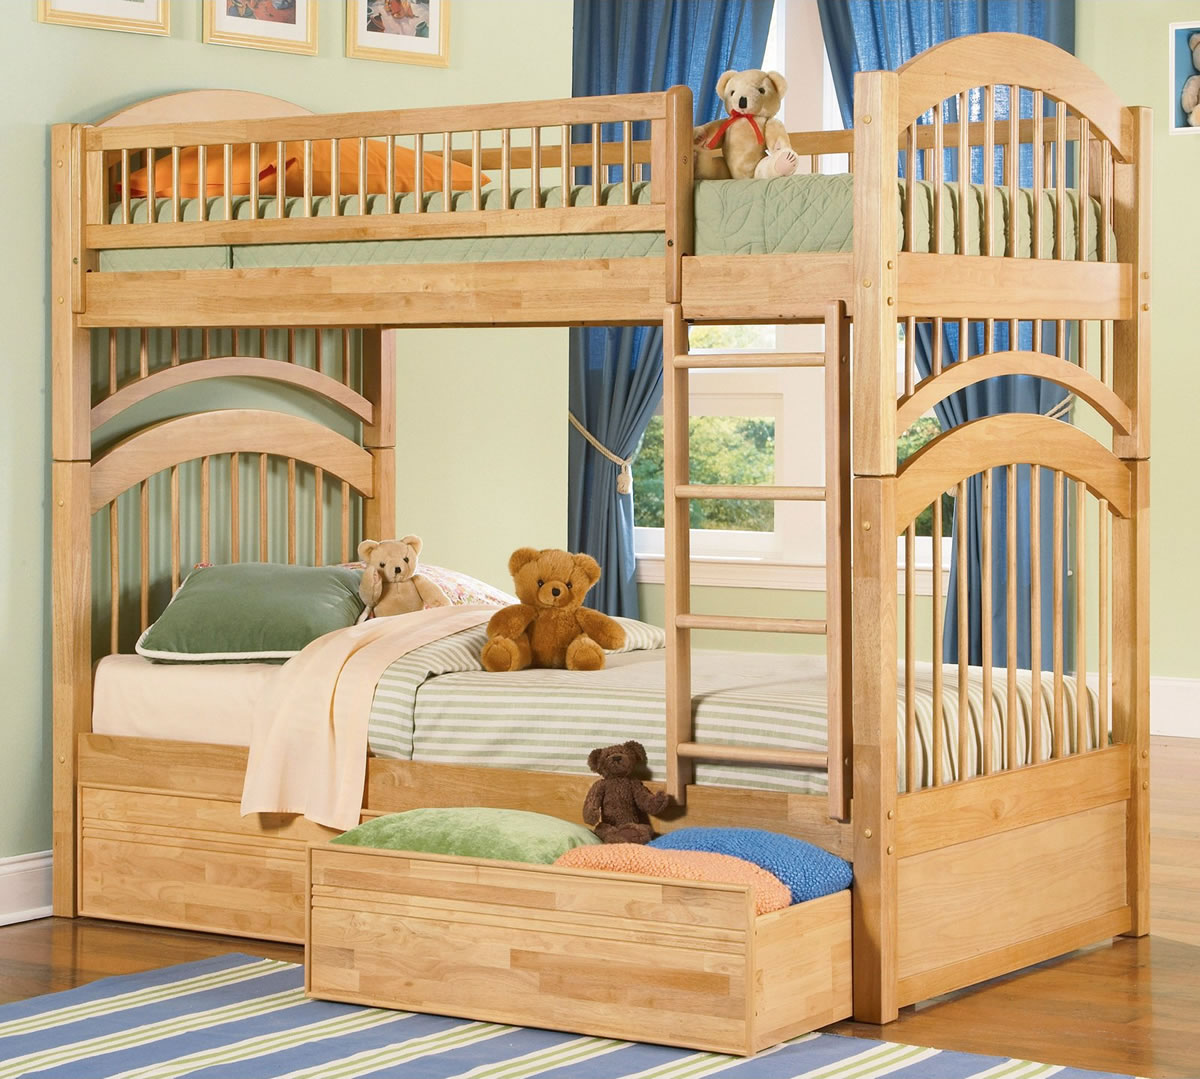 Stanley Bunk Beds Twin Over Full, Stanley Furniture Company Bunk Bed Instructions